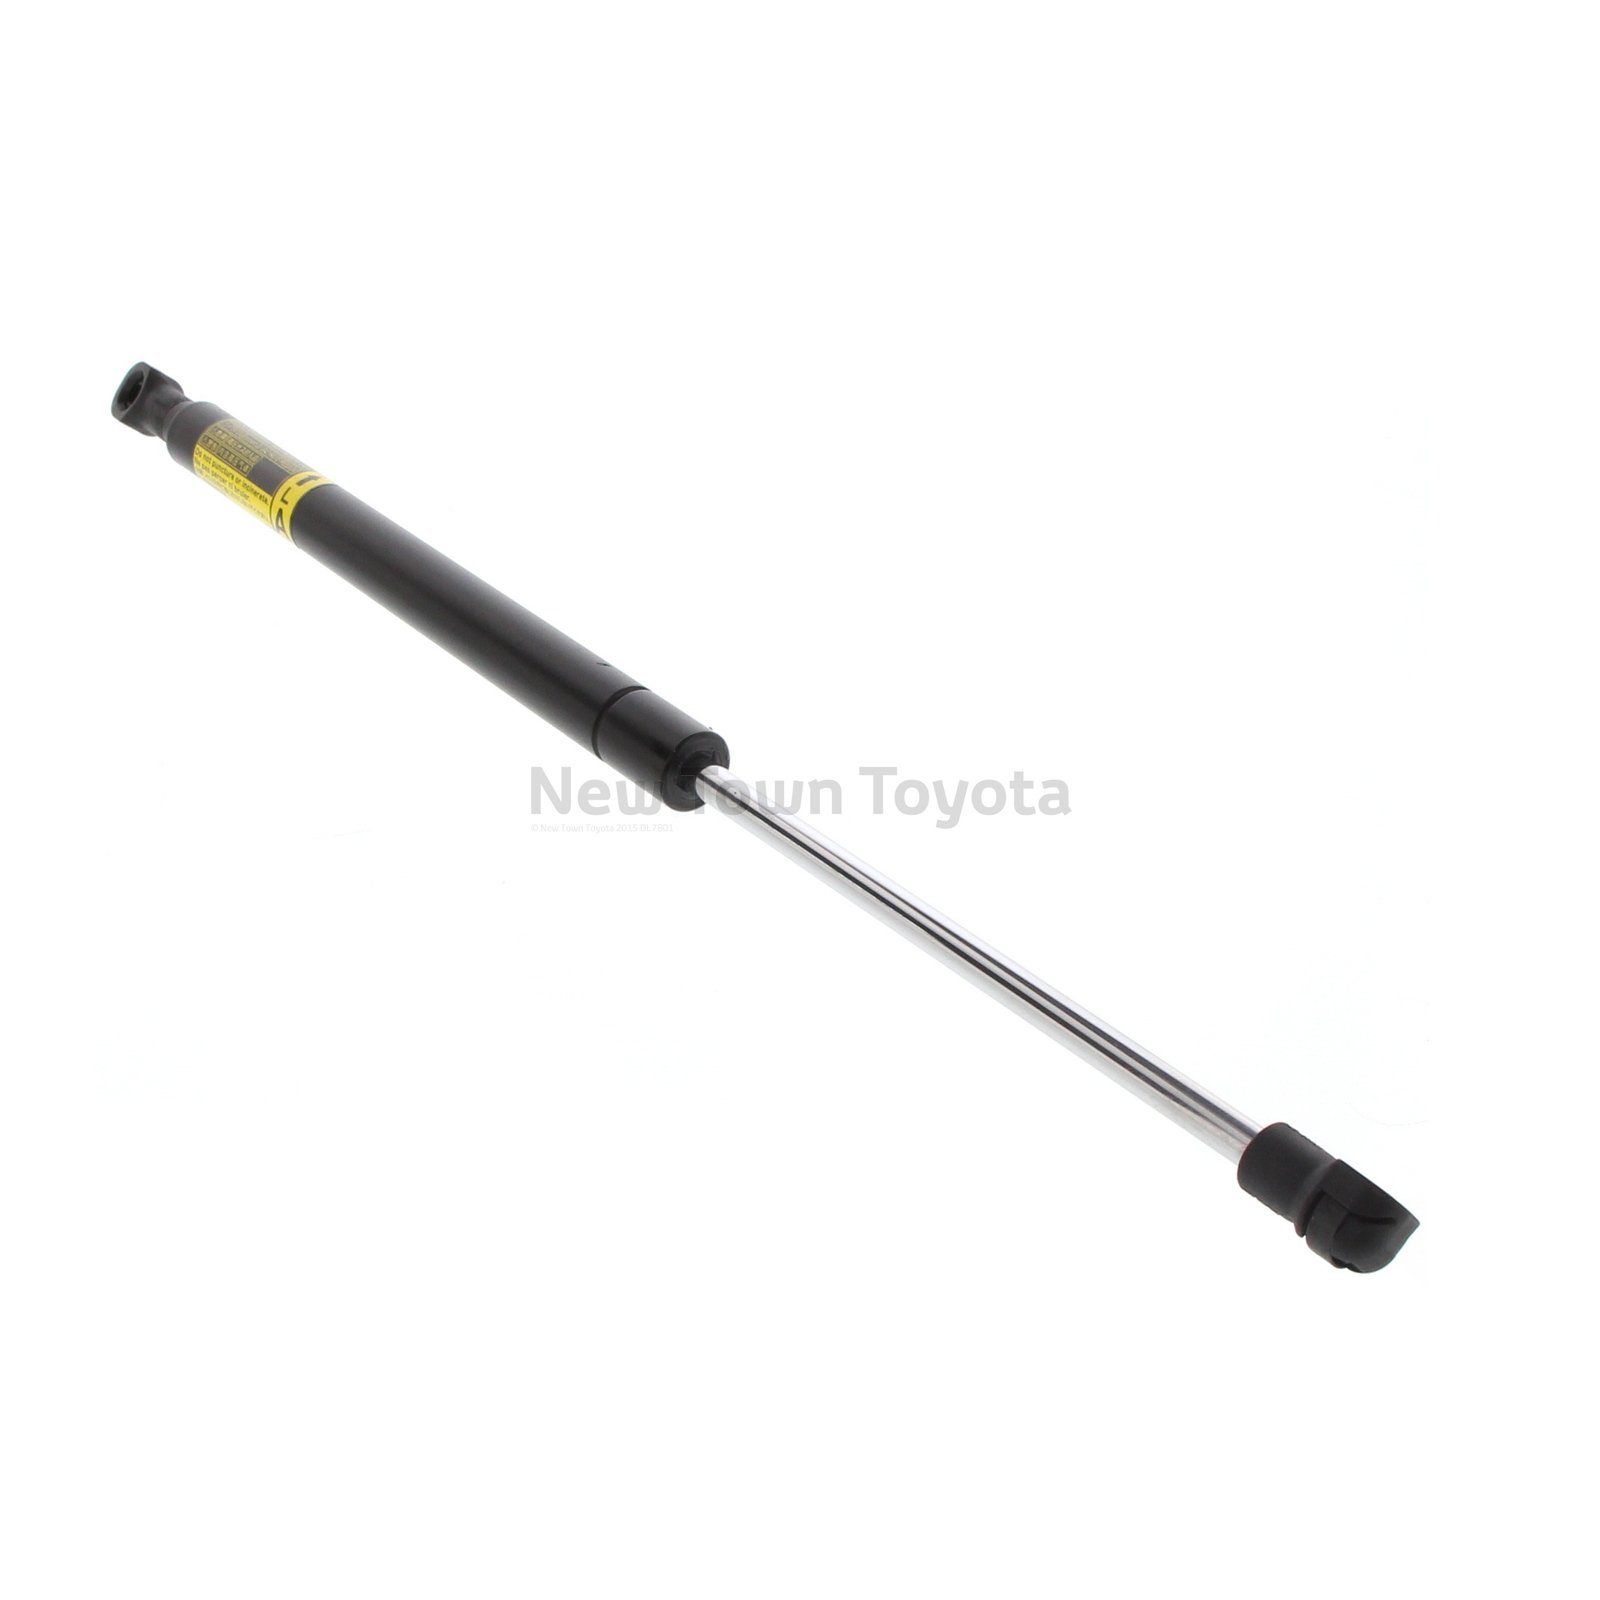 Tailgate Boot Gas Struts for Toyota Corolla Hatchback 2002-2007 440mm